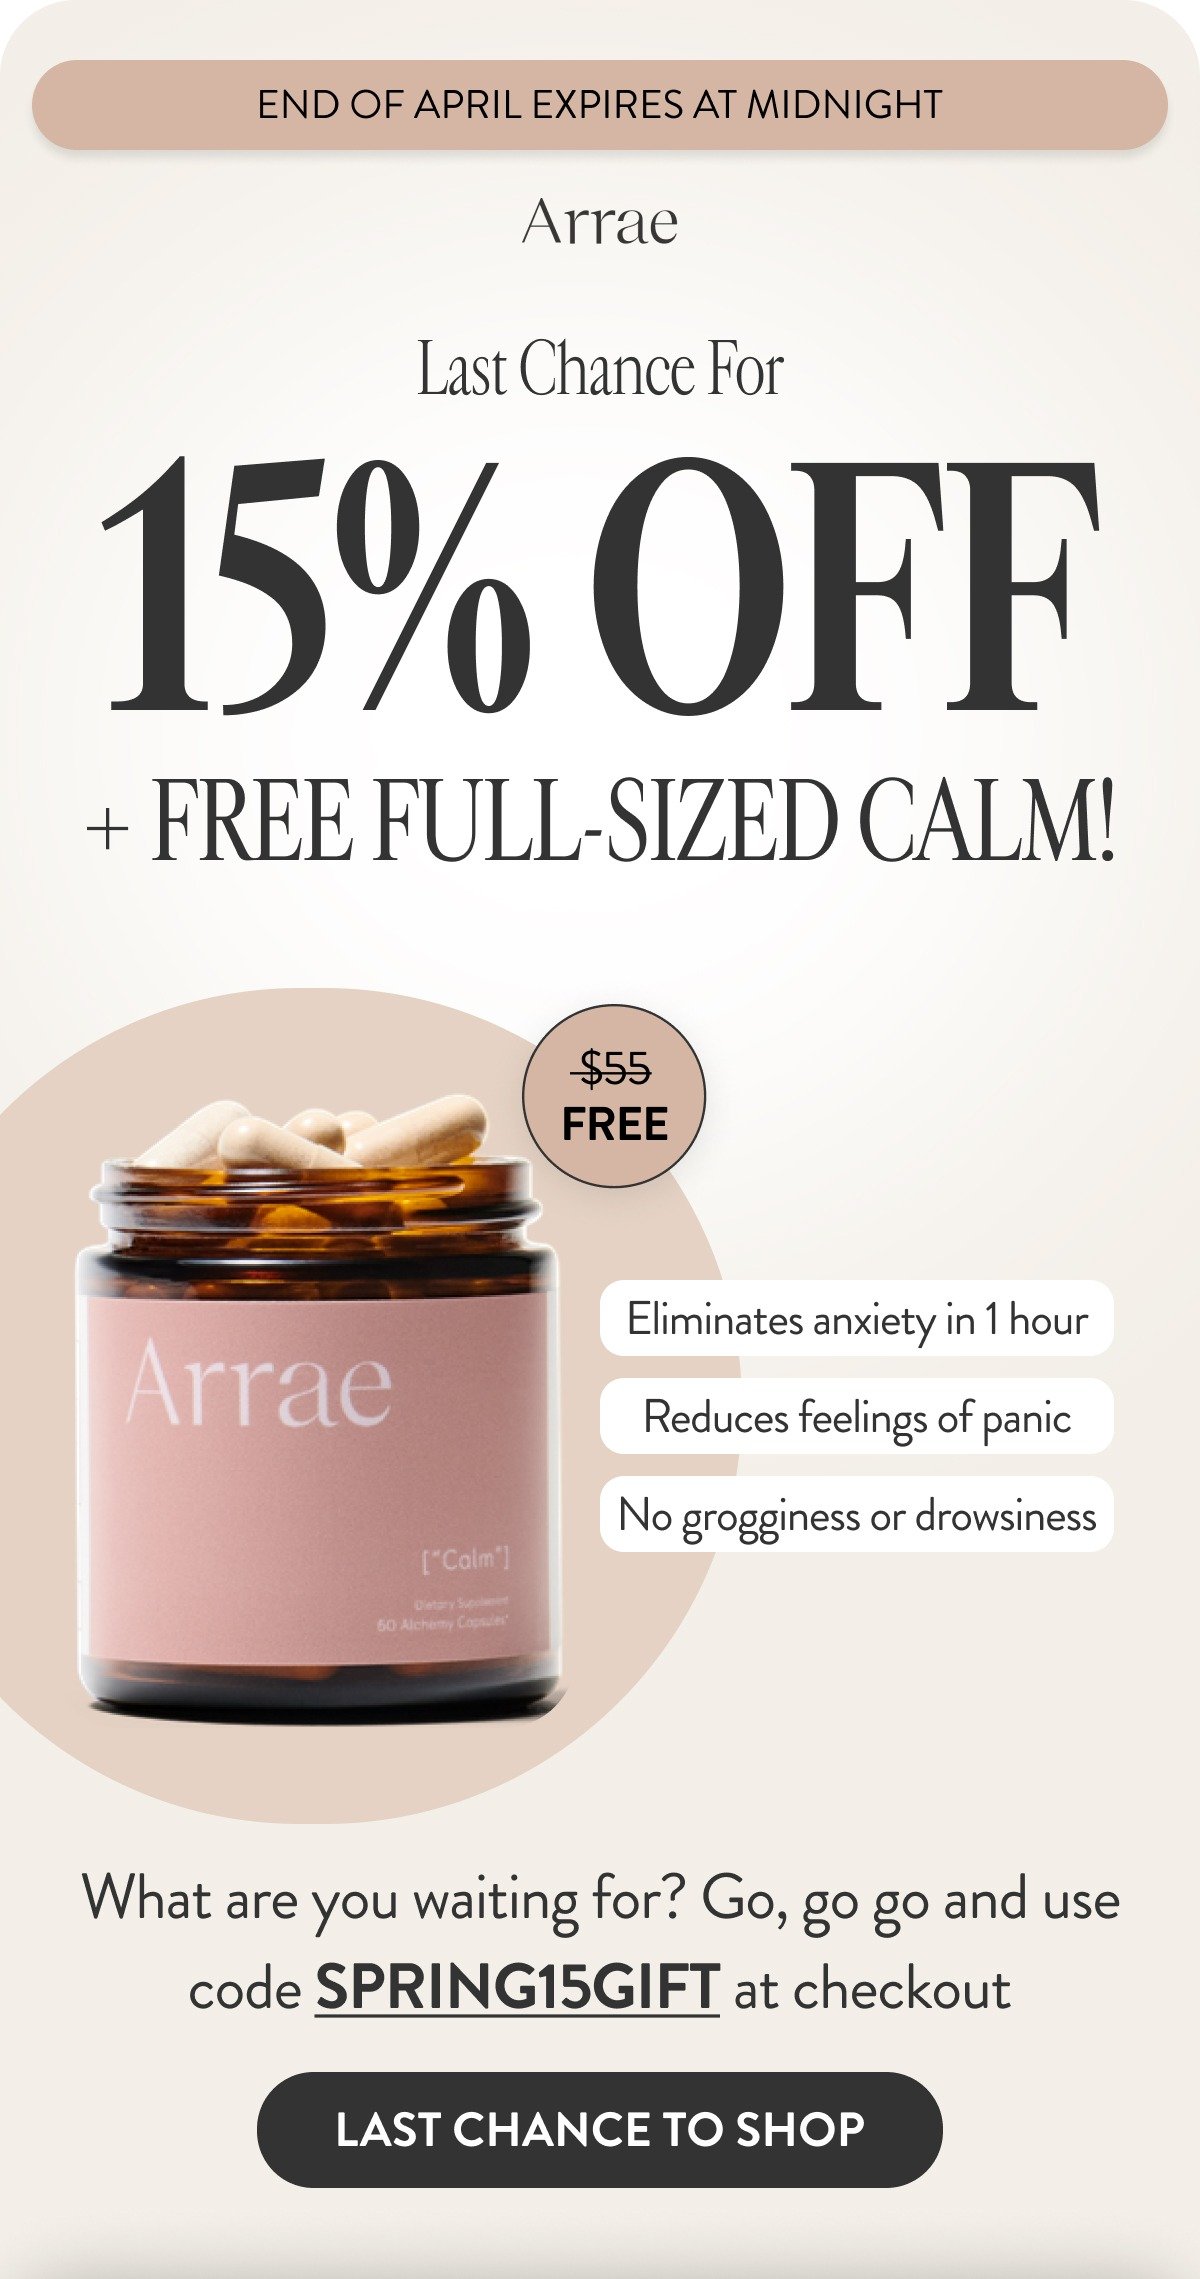 End Of April Expires At Midnight. Last Chance For Up To 15% OFF Plus Free full-Sized Calm! Eliminates anxiety in 1 hour, Reduces feelings of panic, No grogginess or drowsiness. What are you waiting for? Go, go go and use code SPRING15GIFT at checkout. [Last Chance To Shop]